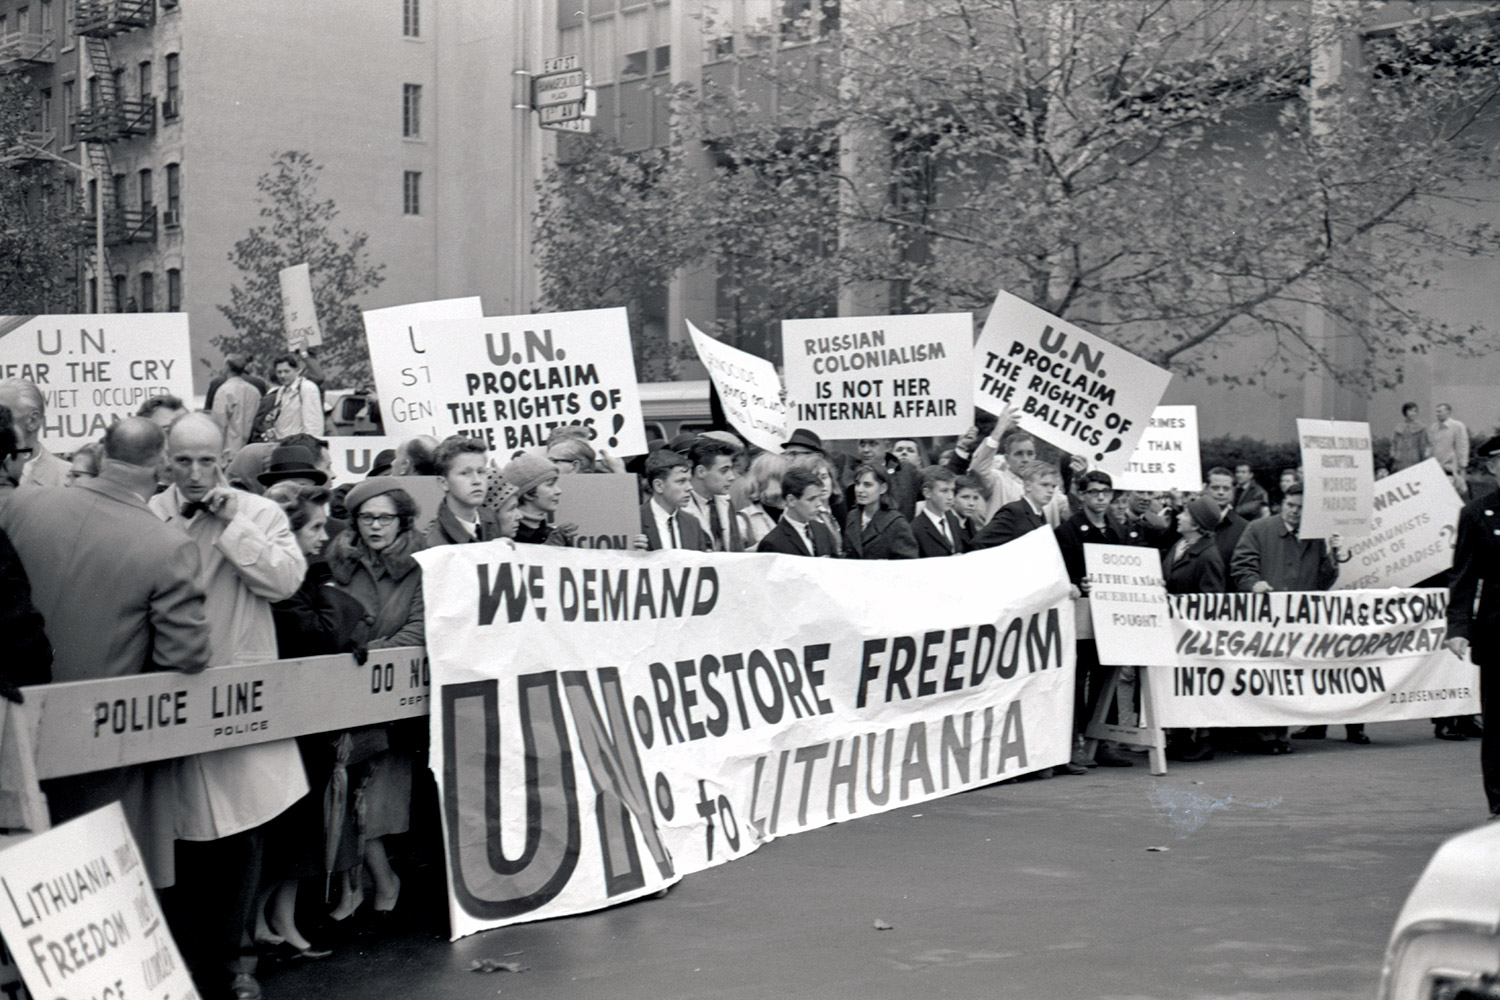 1965 – New York, USA. Manifesto of freedom by representatives of the Baltic States and protest against the actions of the Soviet Union in Lithuania, Latvia, and Estonia. LVCA, photographer: J. Garla.